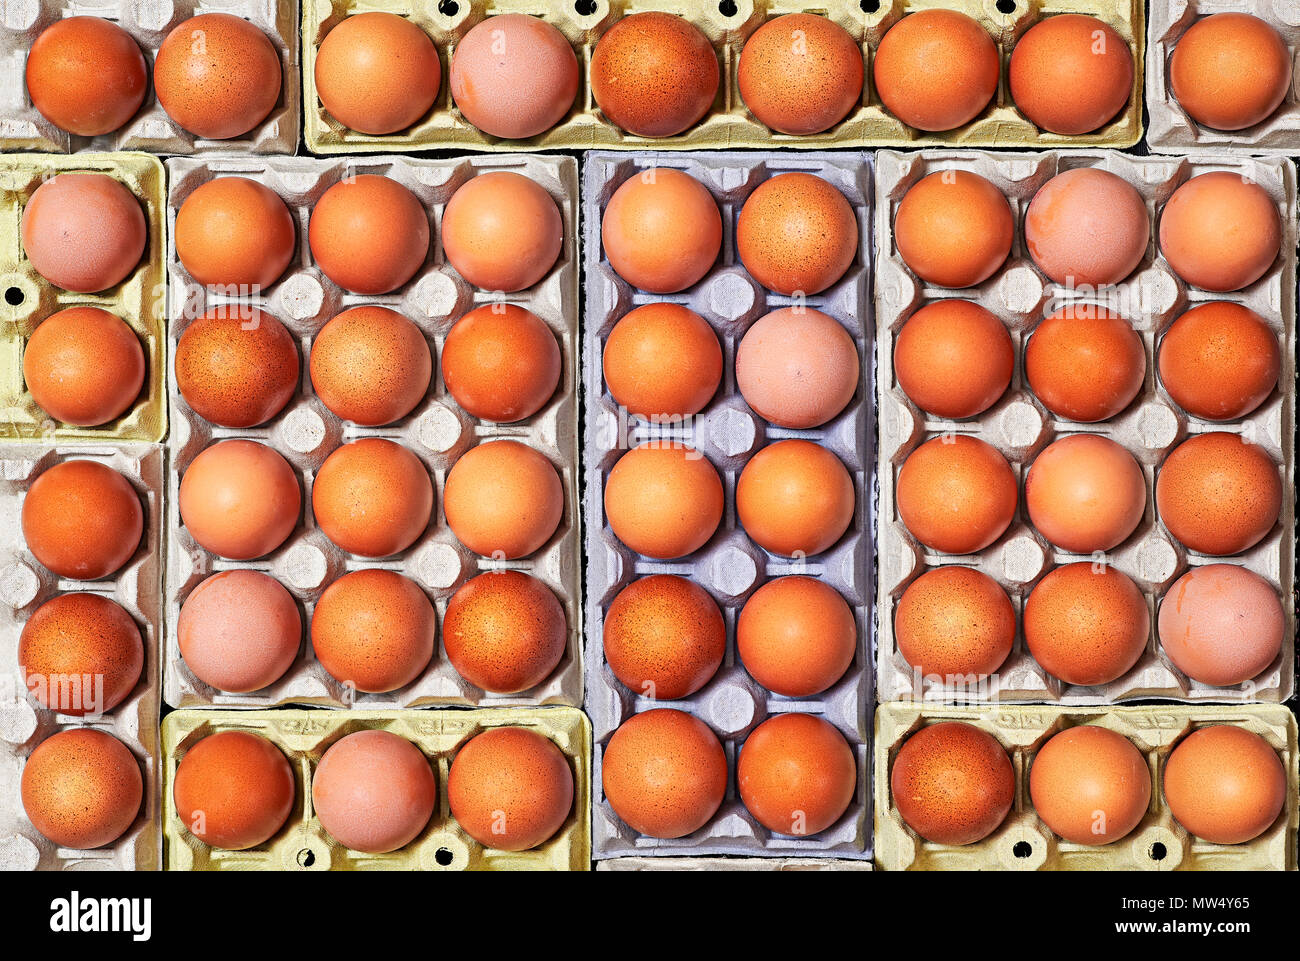 A lot of brown tone eggs over a egg cartons of different colors. Stock Photo